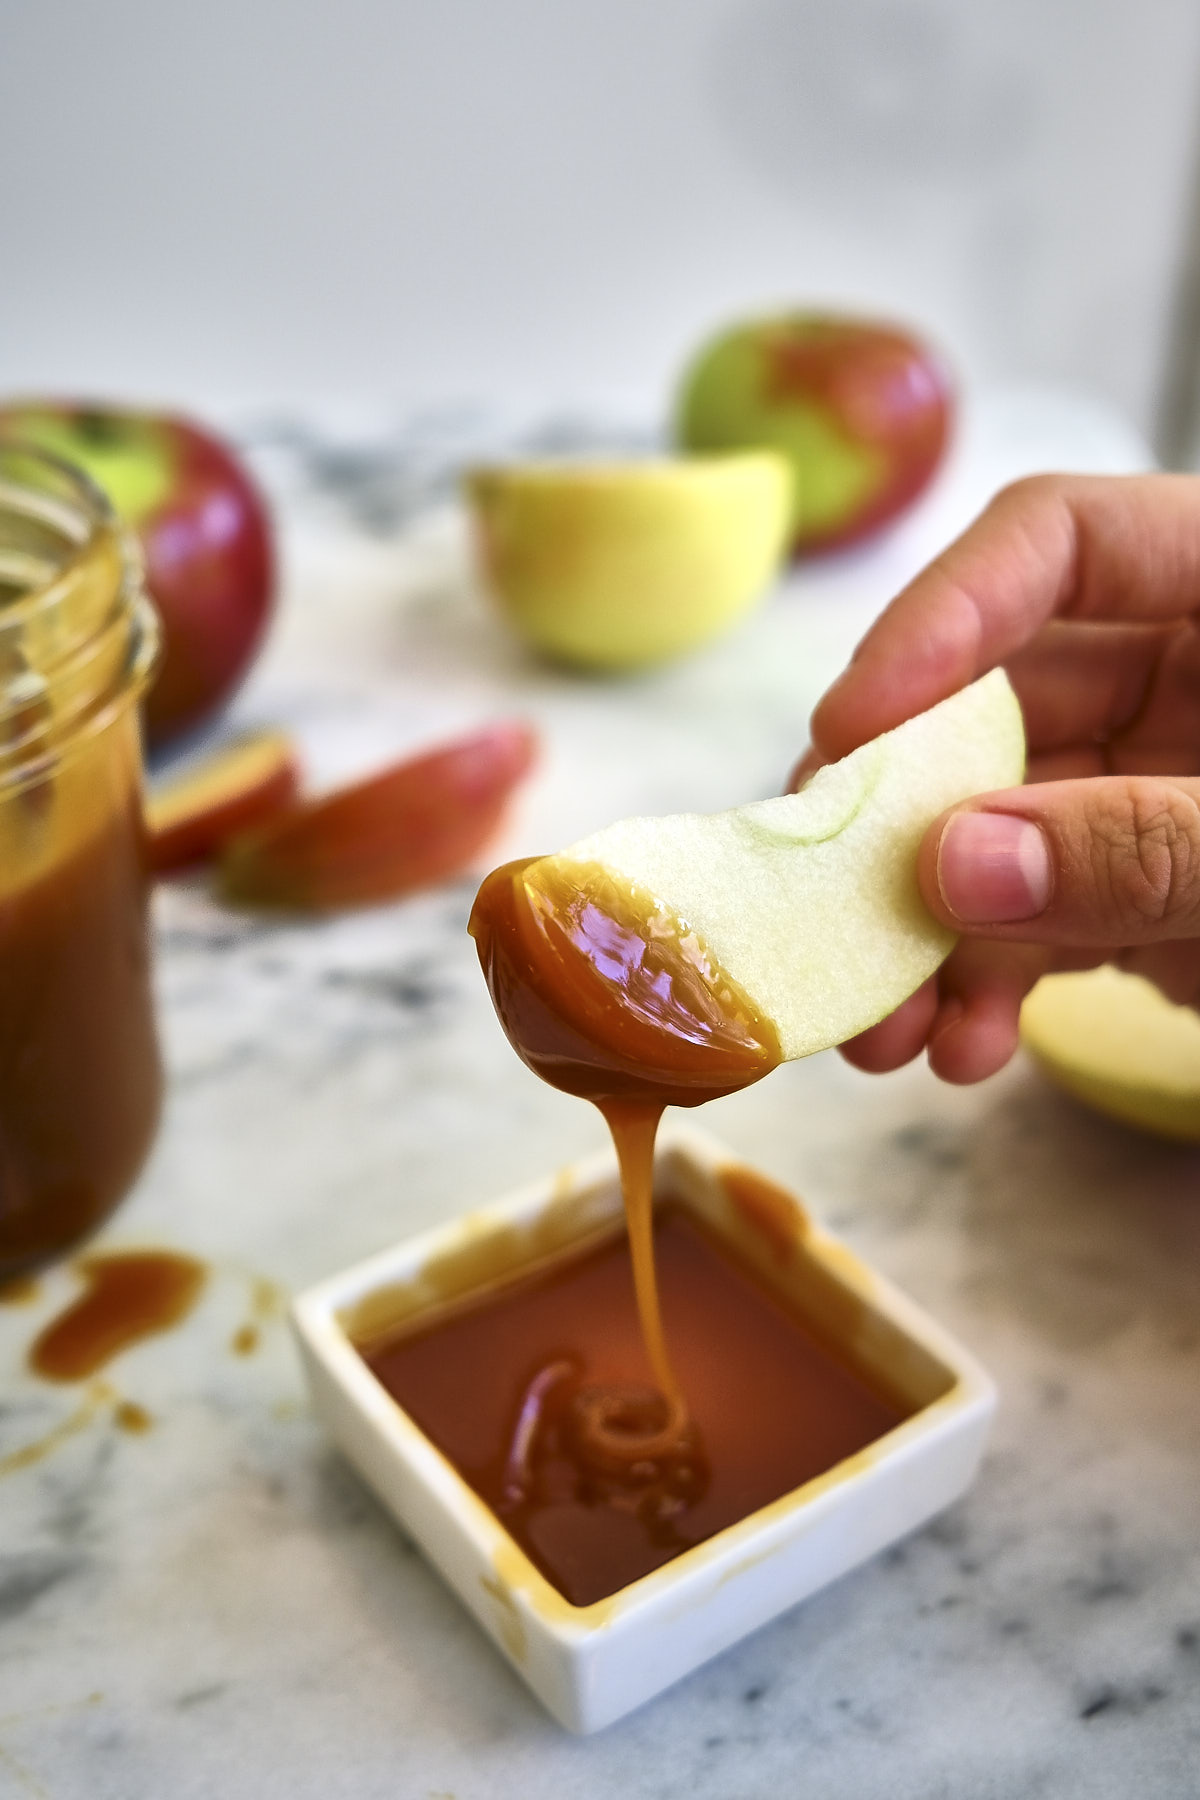 An apple slice dipped into dairy free caramel apple dip.